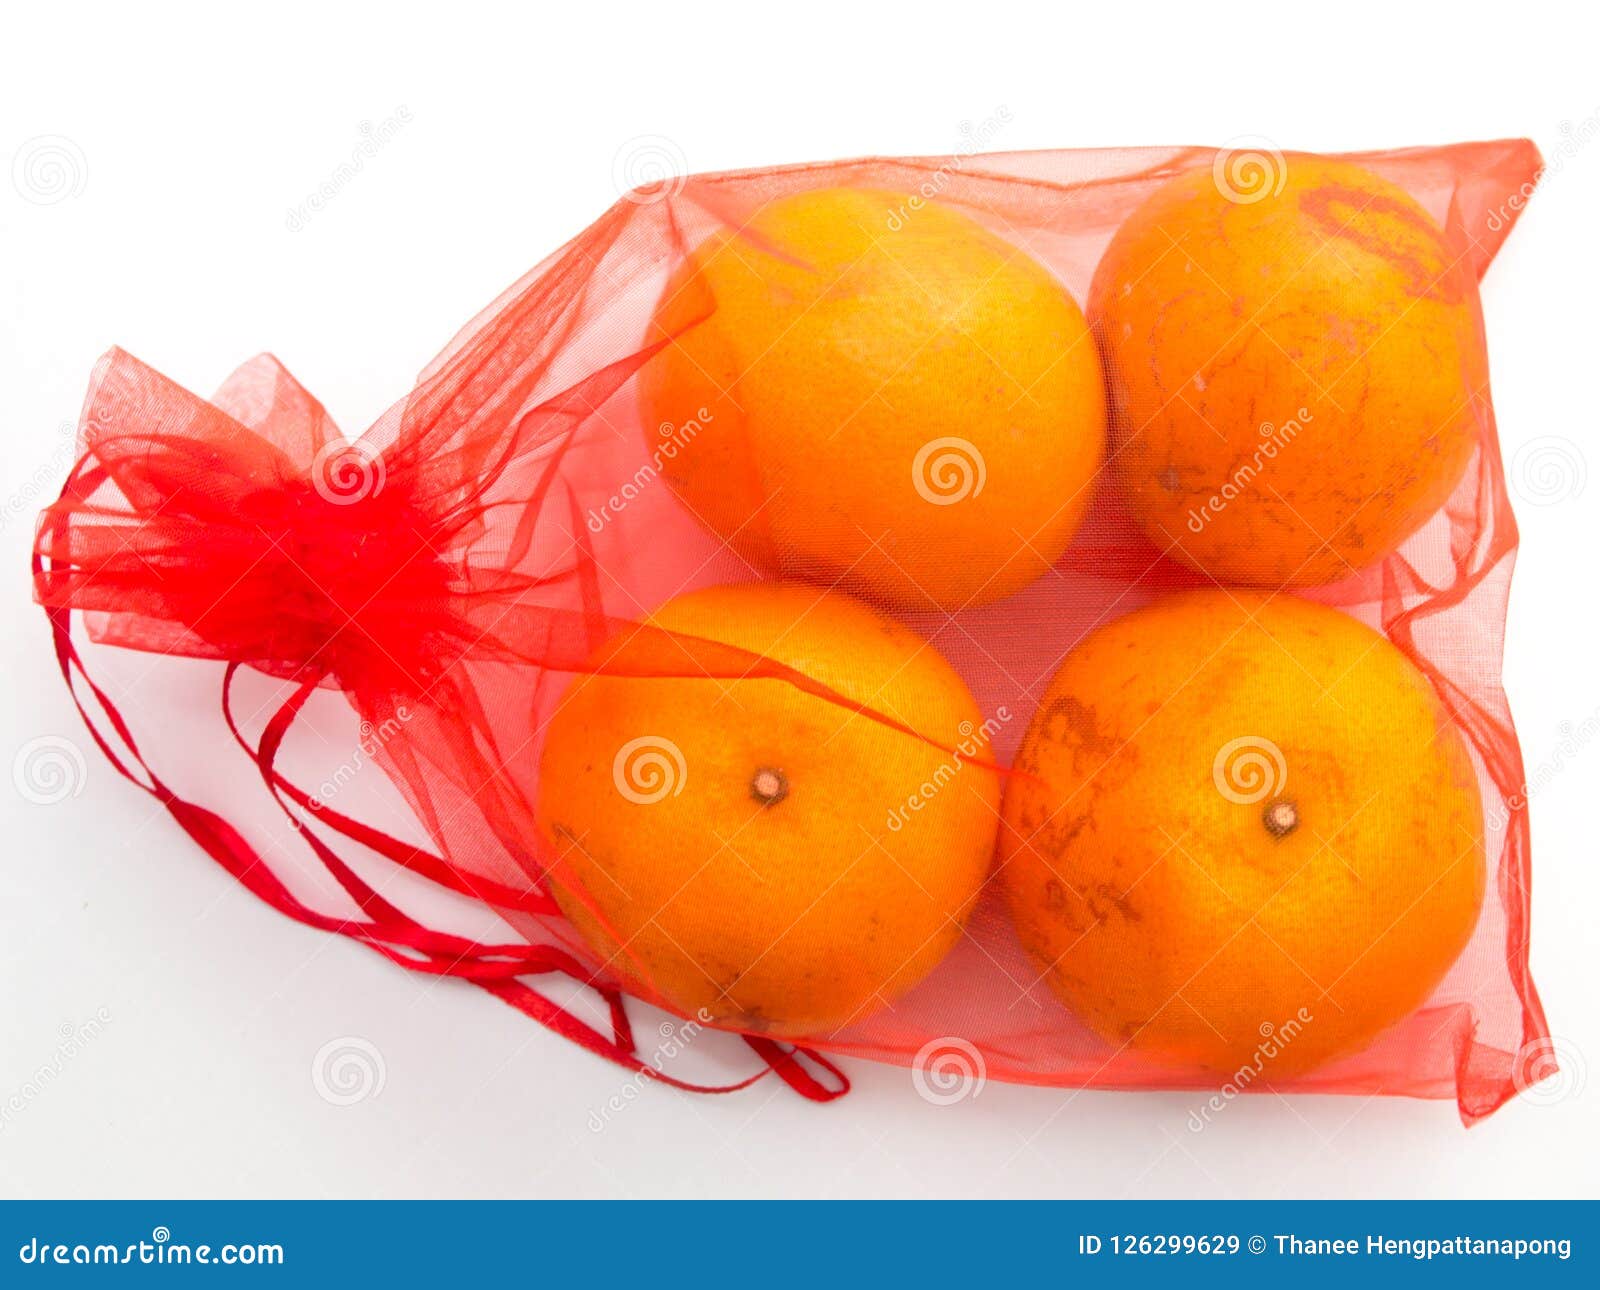 Group of Orange in Red Bag for Chinese New Year Stock Image - Image of ...